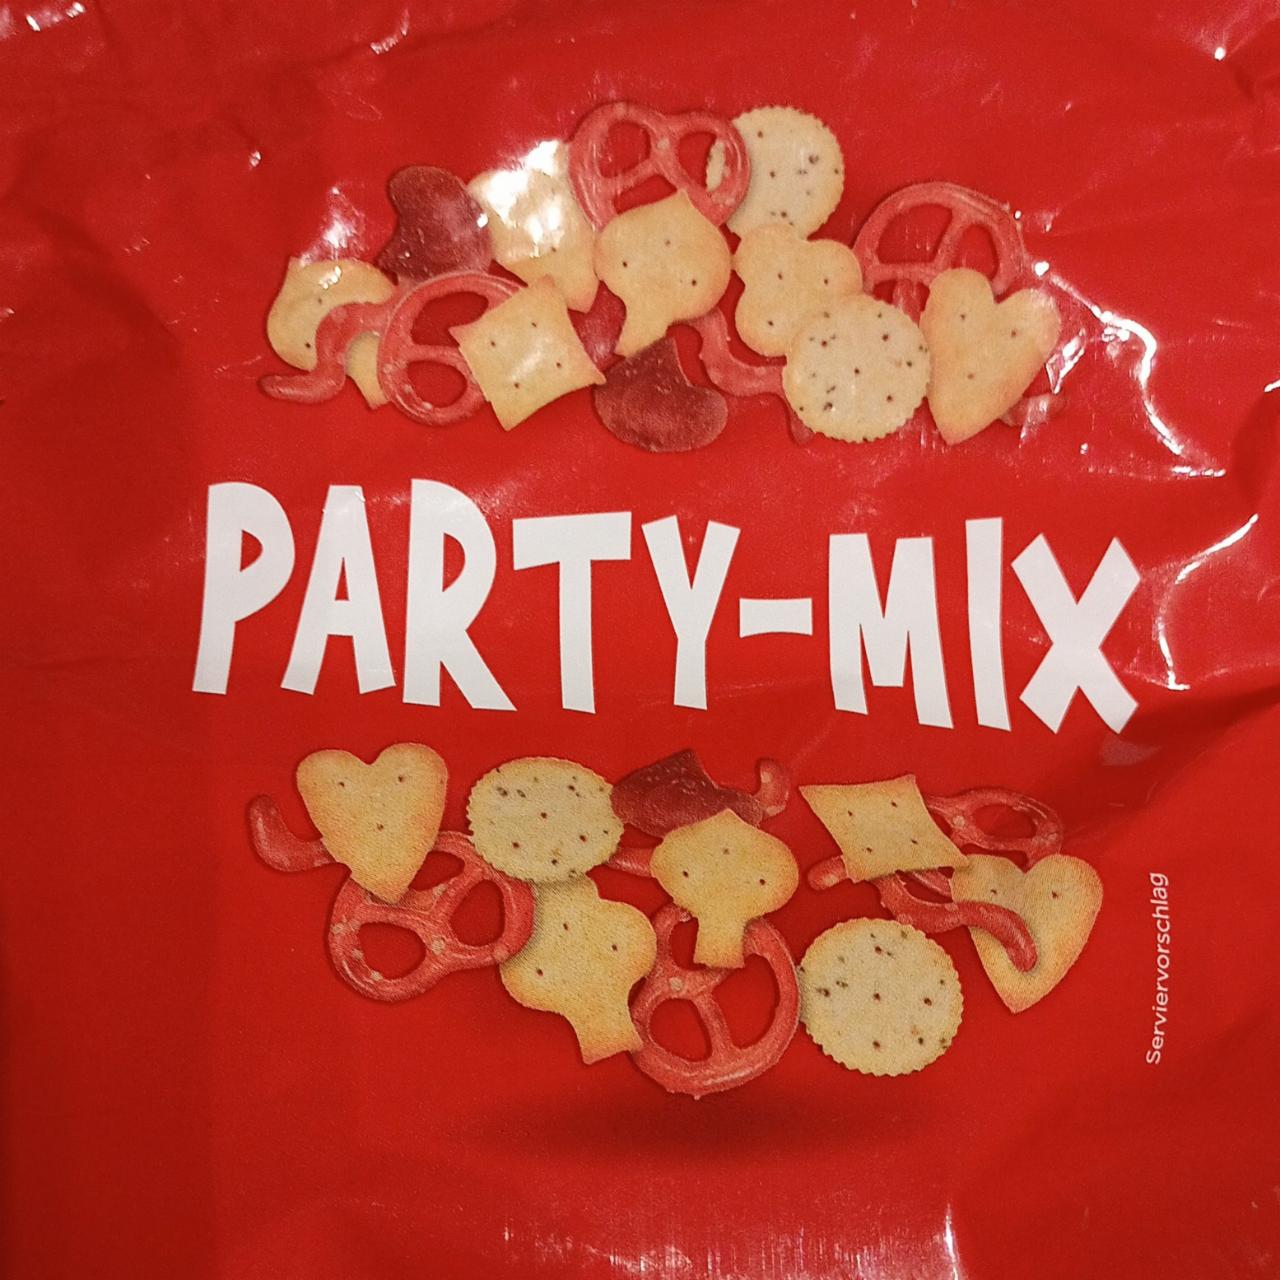 Fotografie - Party mix Snack day